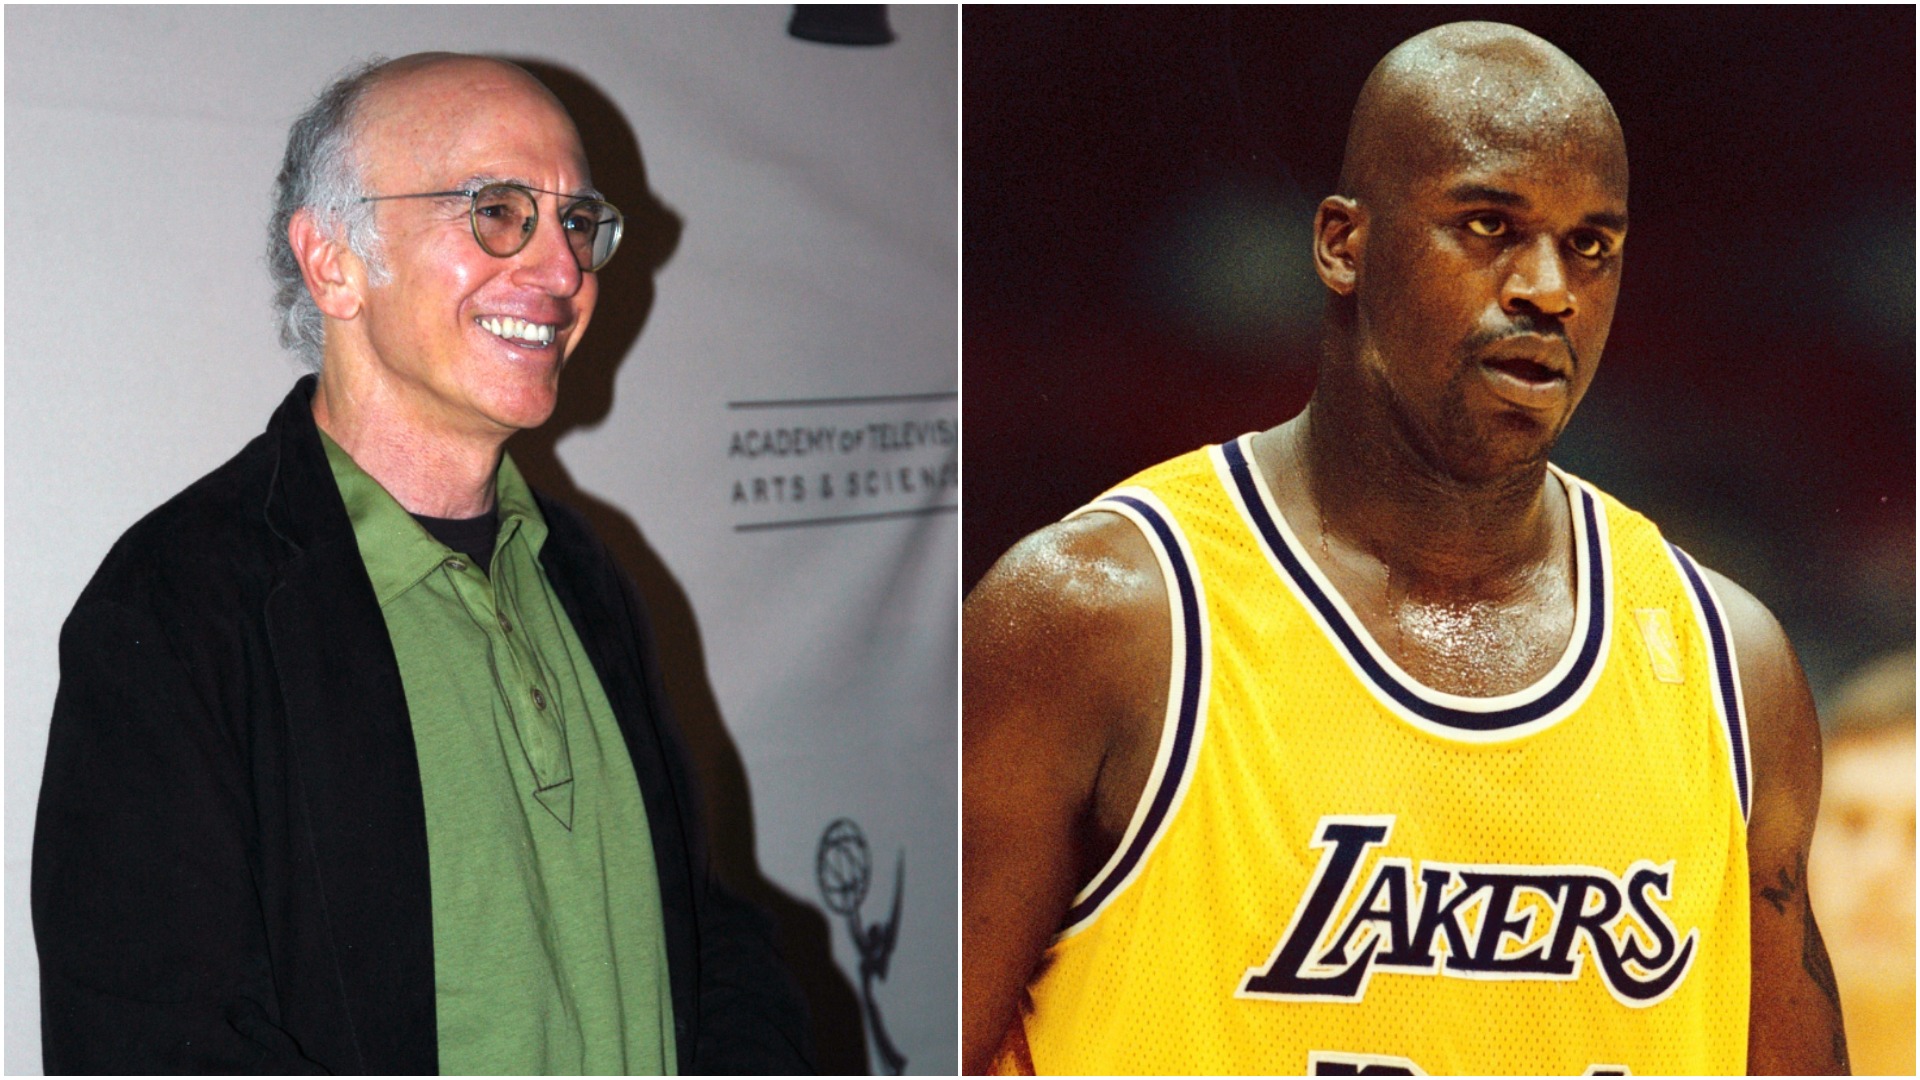 Shaq was on Curb Your Enthusiasm Season 2 and Larry David 'tripped' him